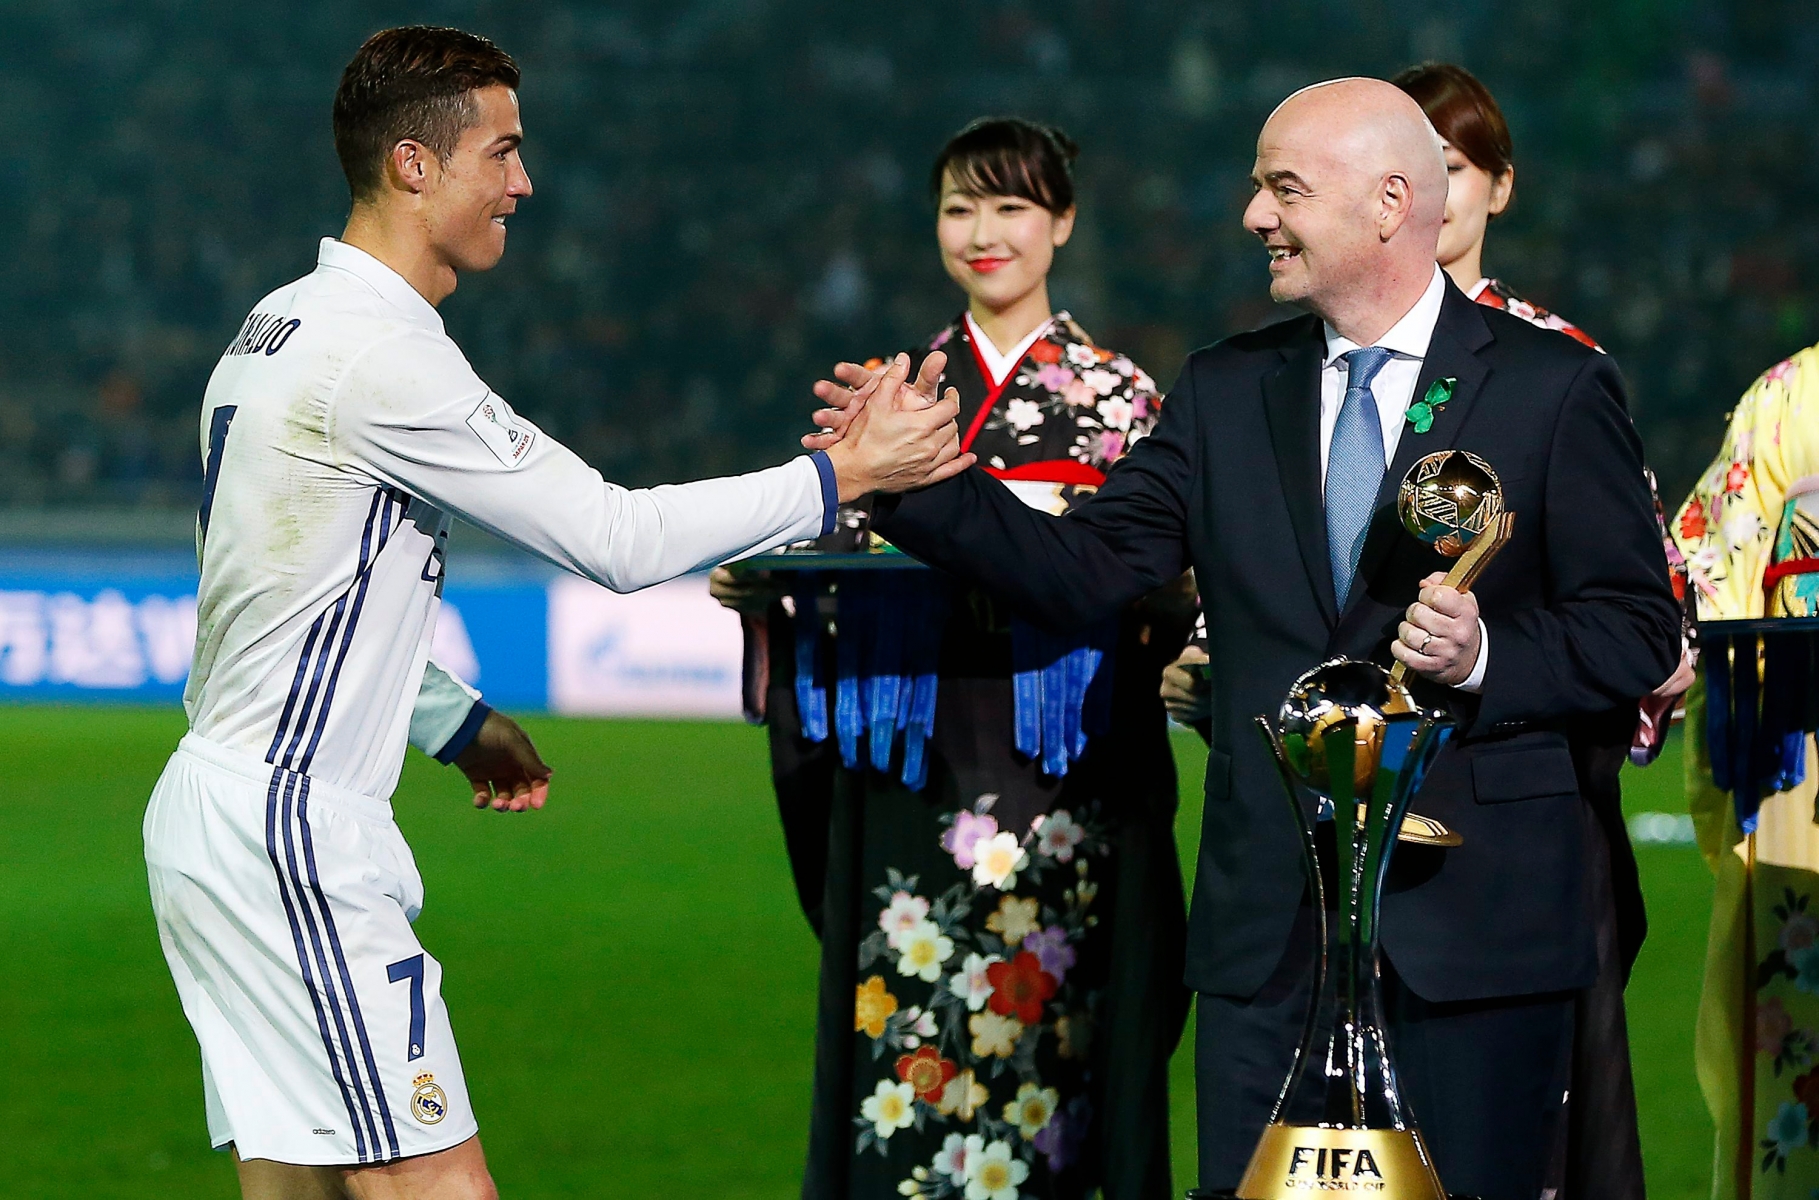 epa05681056 Real Madrid's Cristiano Ronaldo (L) receives the best player trophy by FIFA President Gianni Infantino (R) after winning the FIFA Club World Cup 2016 final between Real Madrid and Kashima Antlers in Yokohama, Japan, 18 December 2016. Real Madrid won 4-2 after extra time.  EPA/YUYA SHINO JAPAN SOCCER FIFA CLUB WORLD CUP 2016